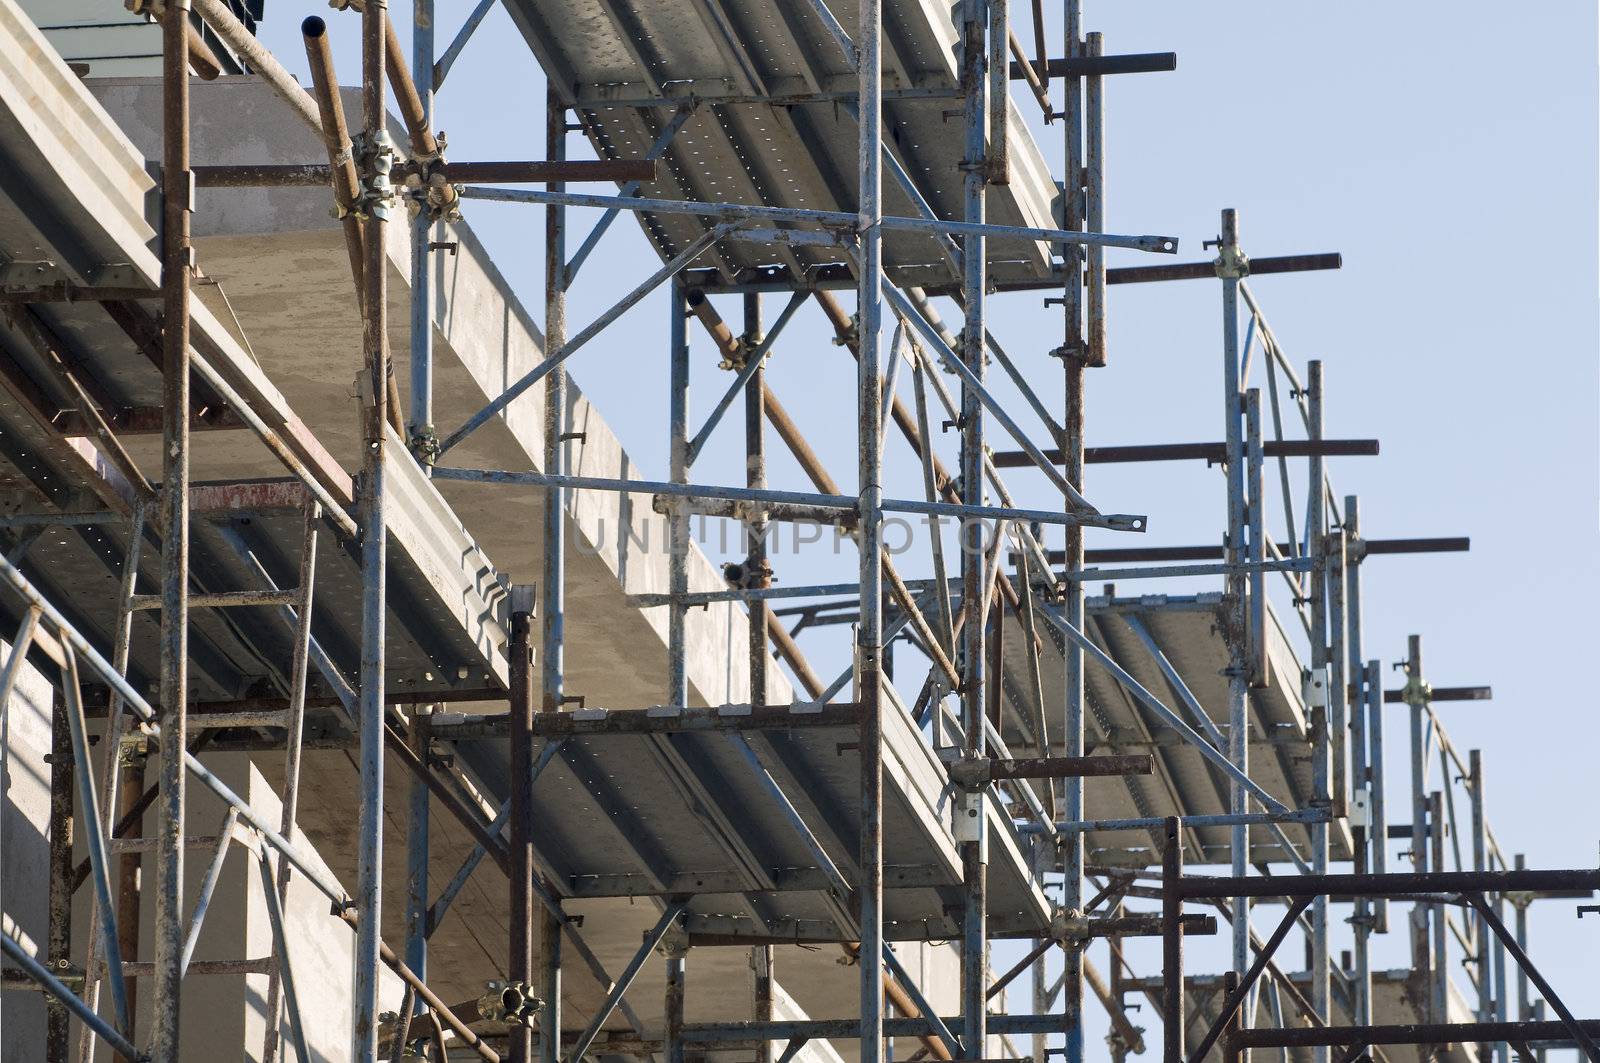 Detail of scaffolding in a construction site